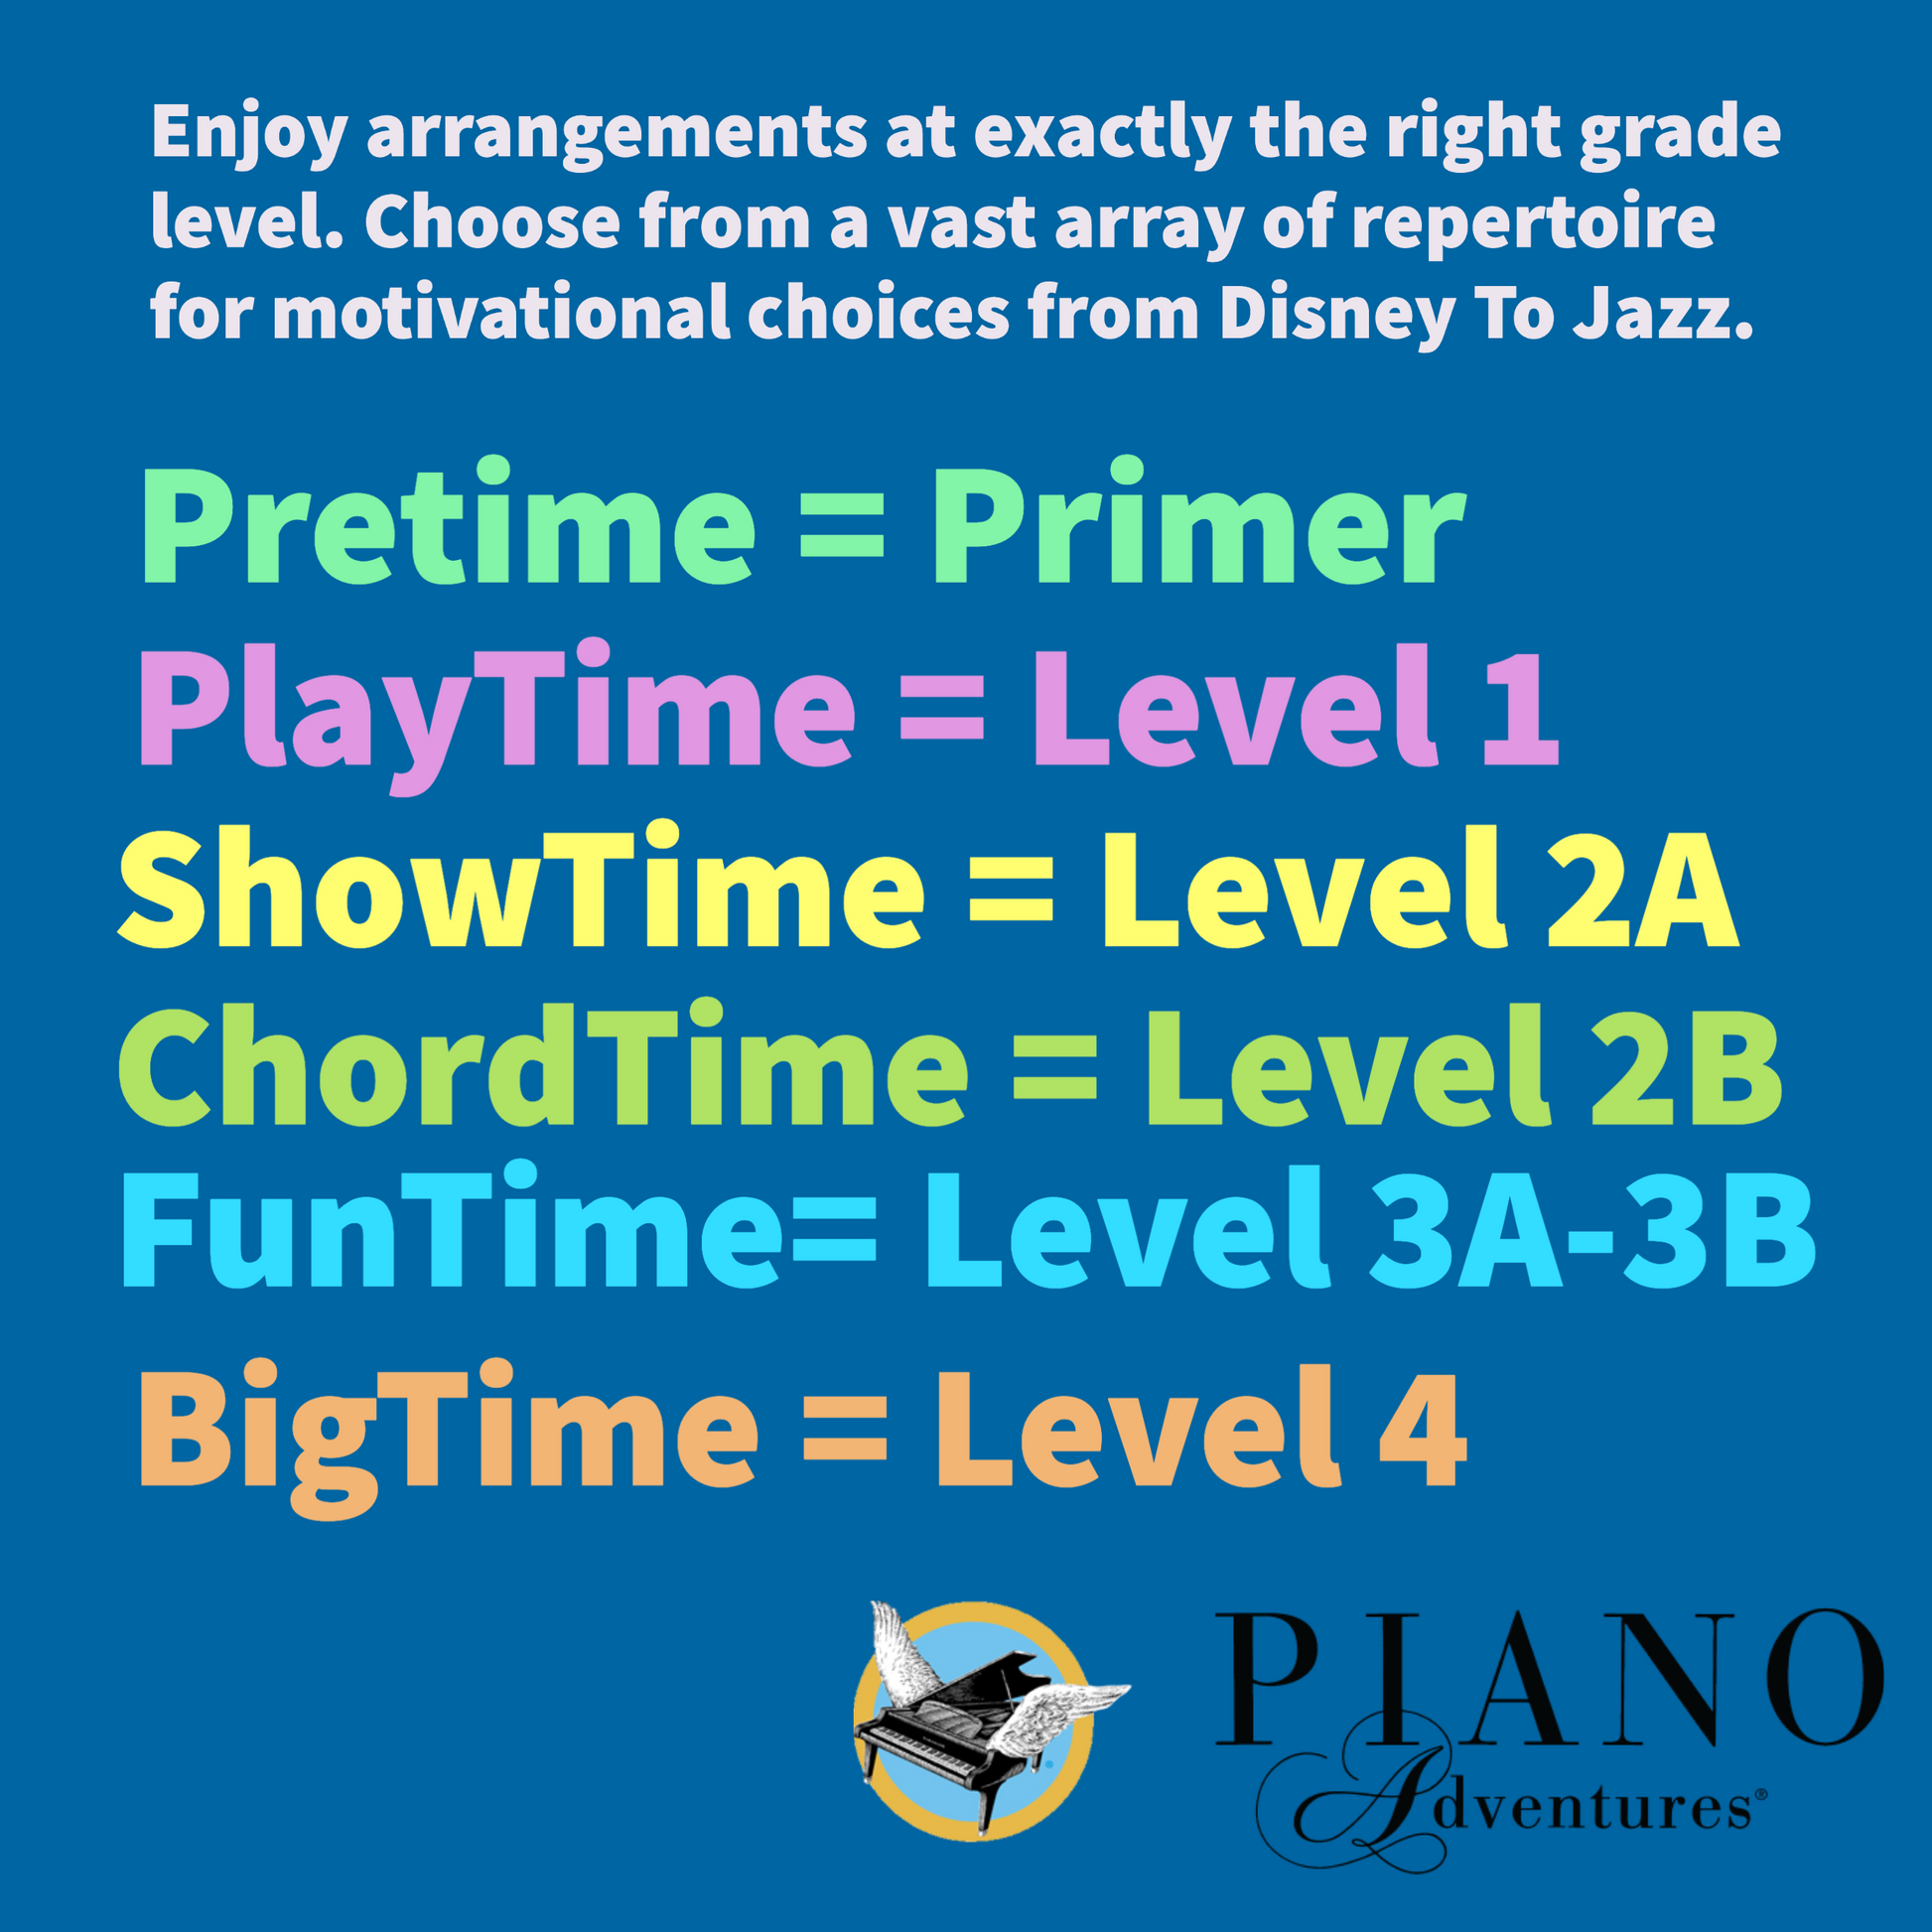 Faber Piano Adventures: Playtime Music From China Level 1 Book & Keyboard